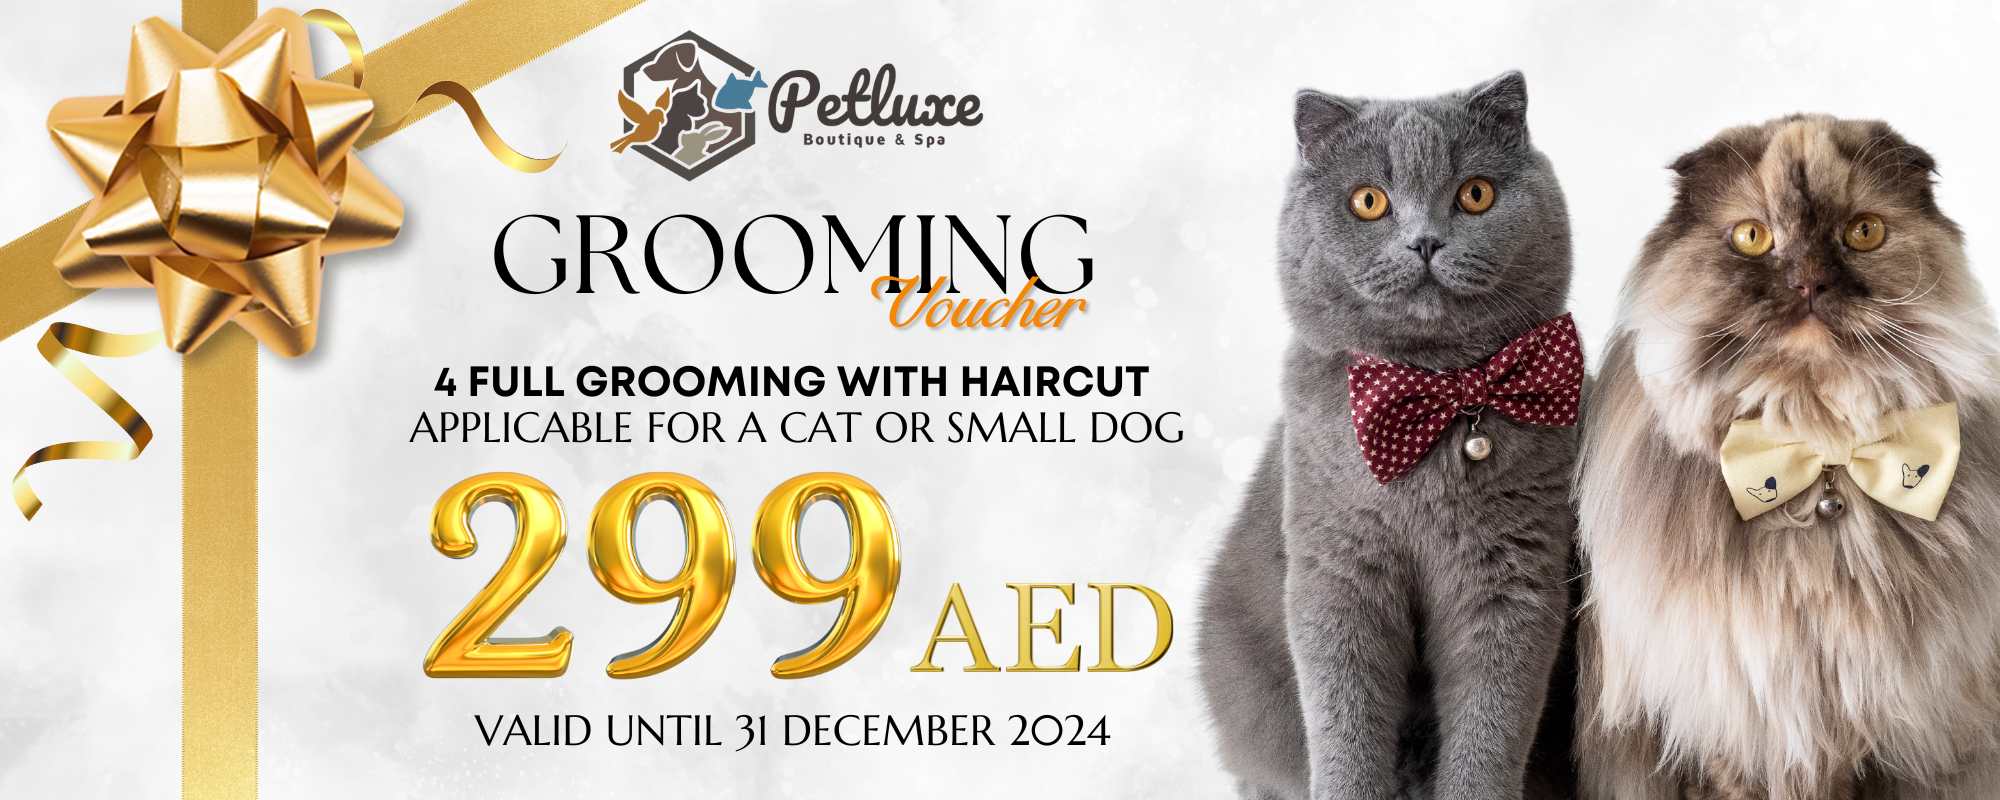 Pet Grooming Voucher for a Cat or Small Dog